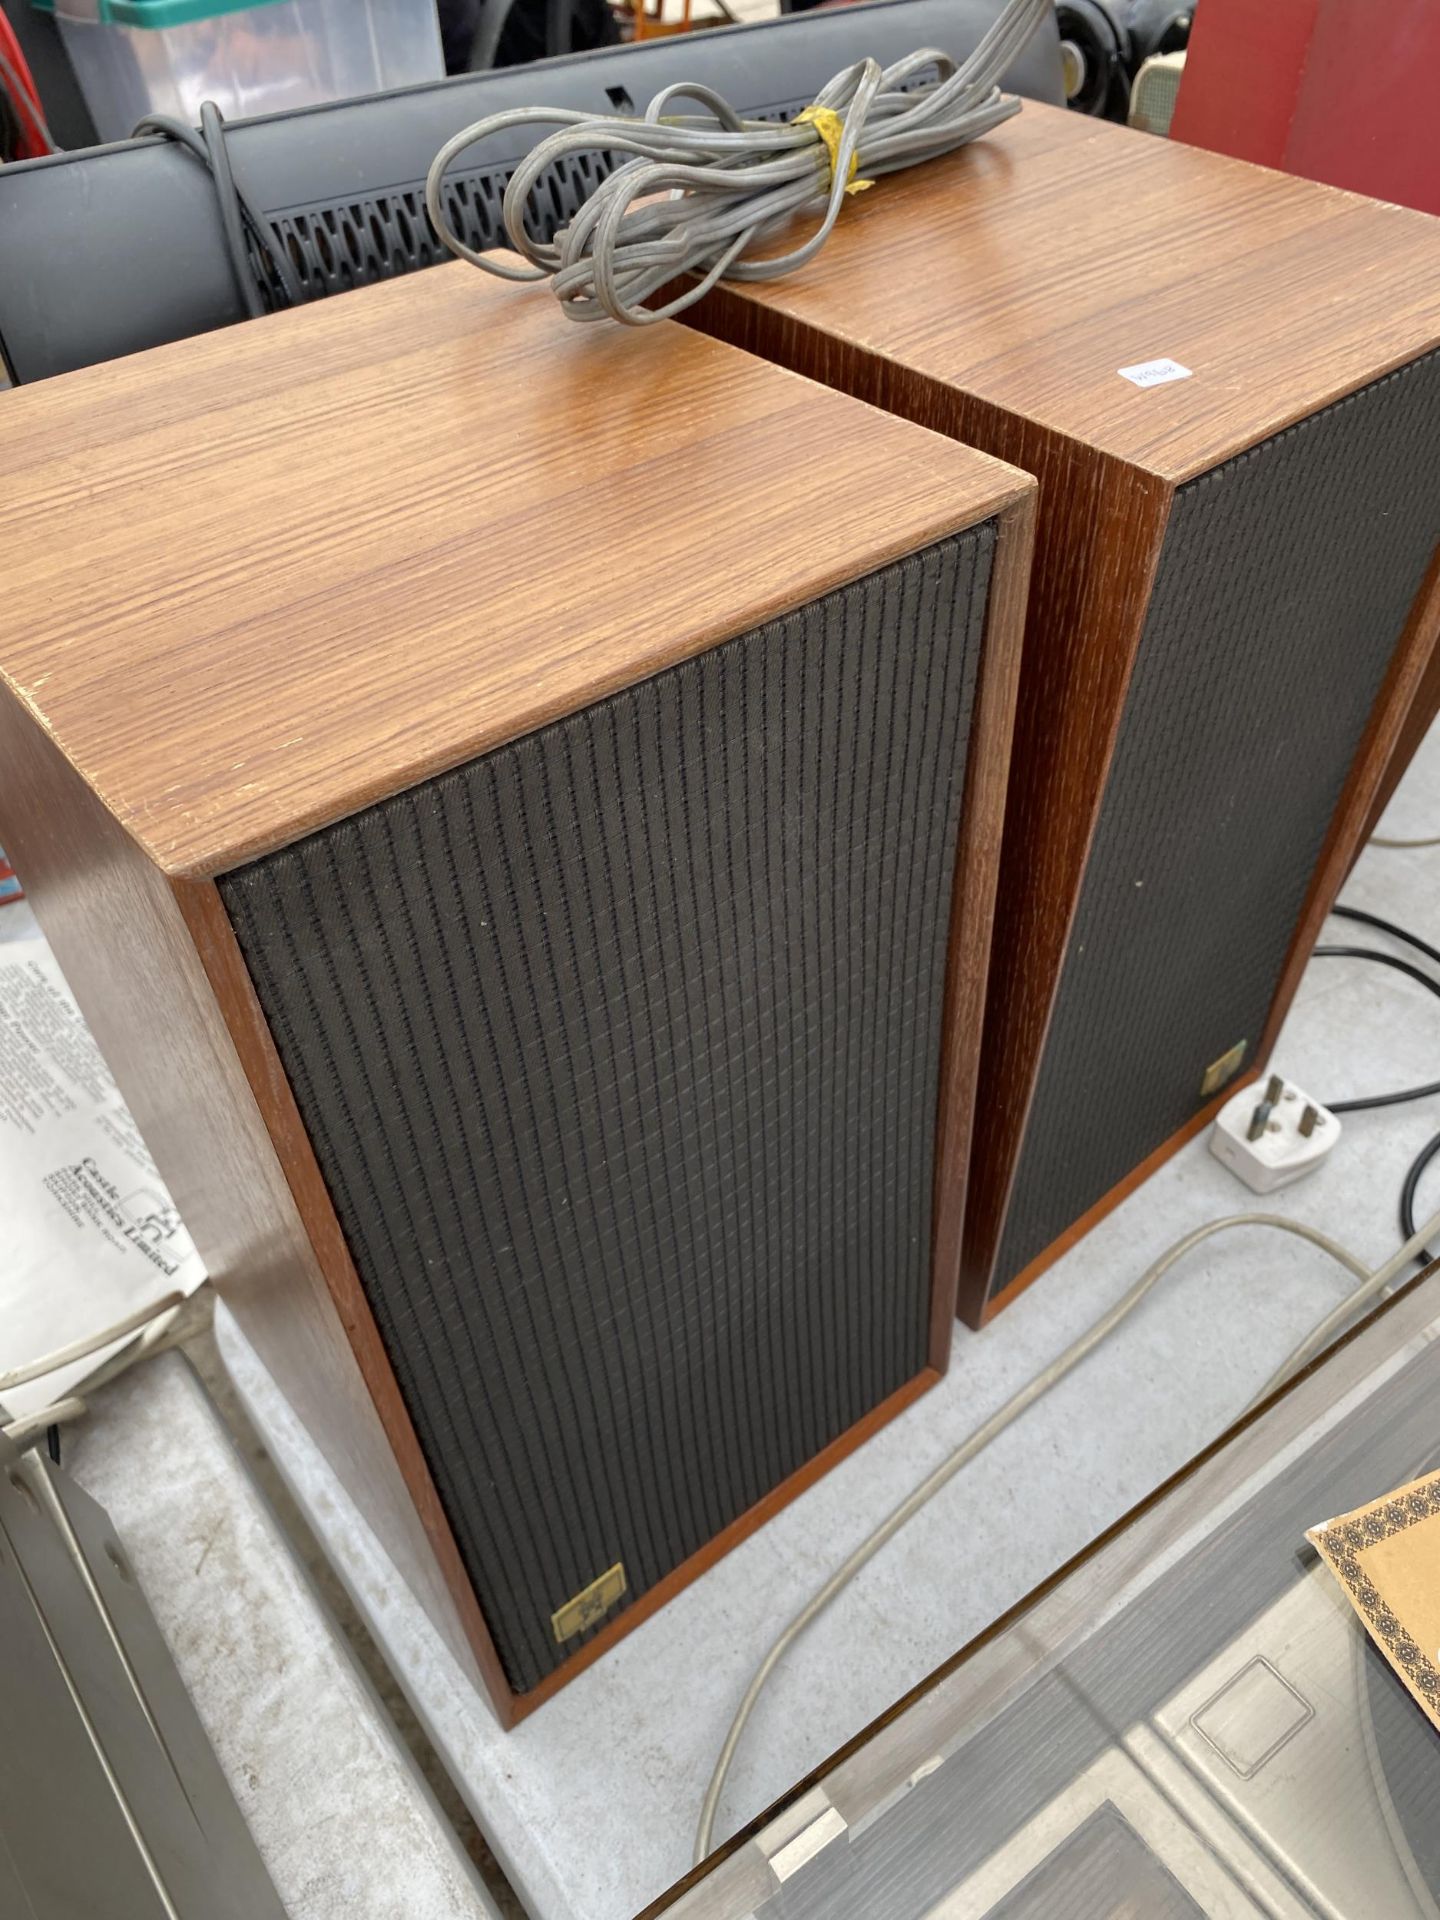 A RETRO PHILIPS RECORD PLAYER AND A PAIR OF WOODEN CASED SPEAKERS - Image 7 of 7